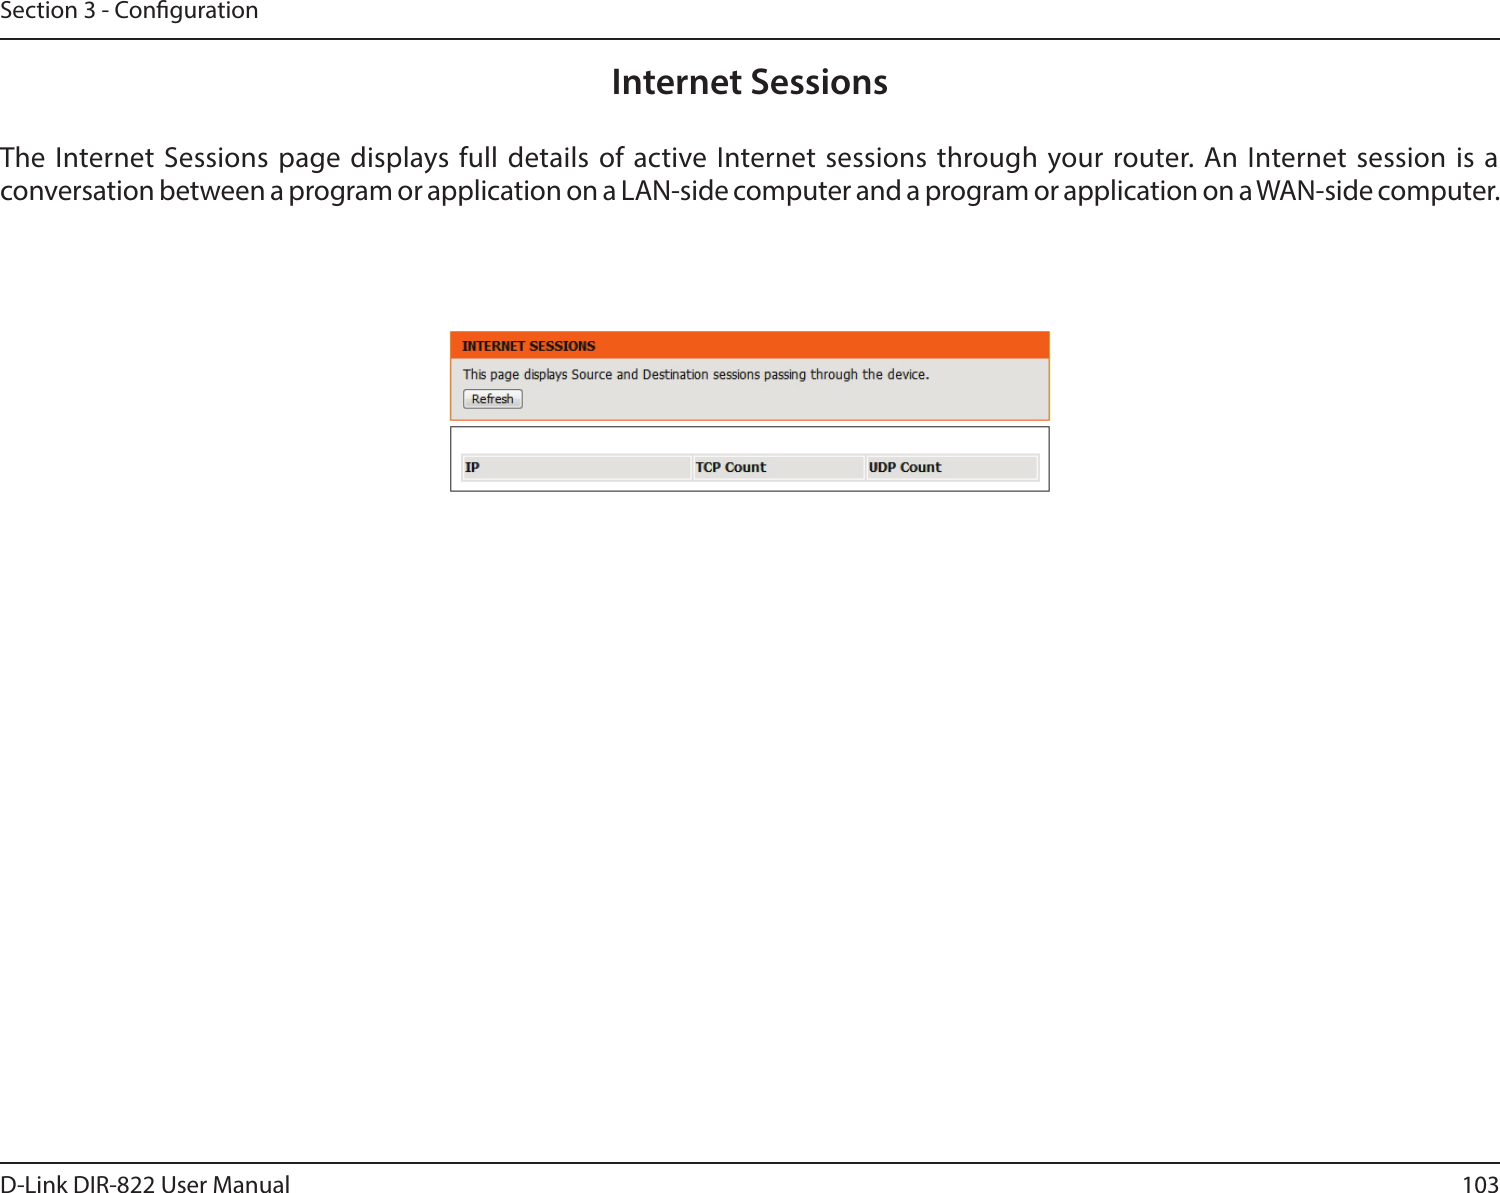 103D-Link DIR-822 User ManualSection 3 - CongurationInternet SessionsThe Internet Sessions page displays full details of active Internet sessions through your router. An Internet session is a conversation between a program or application on a LAN-side computer and a program or application on a WAN-side computer. 